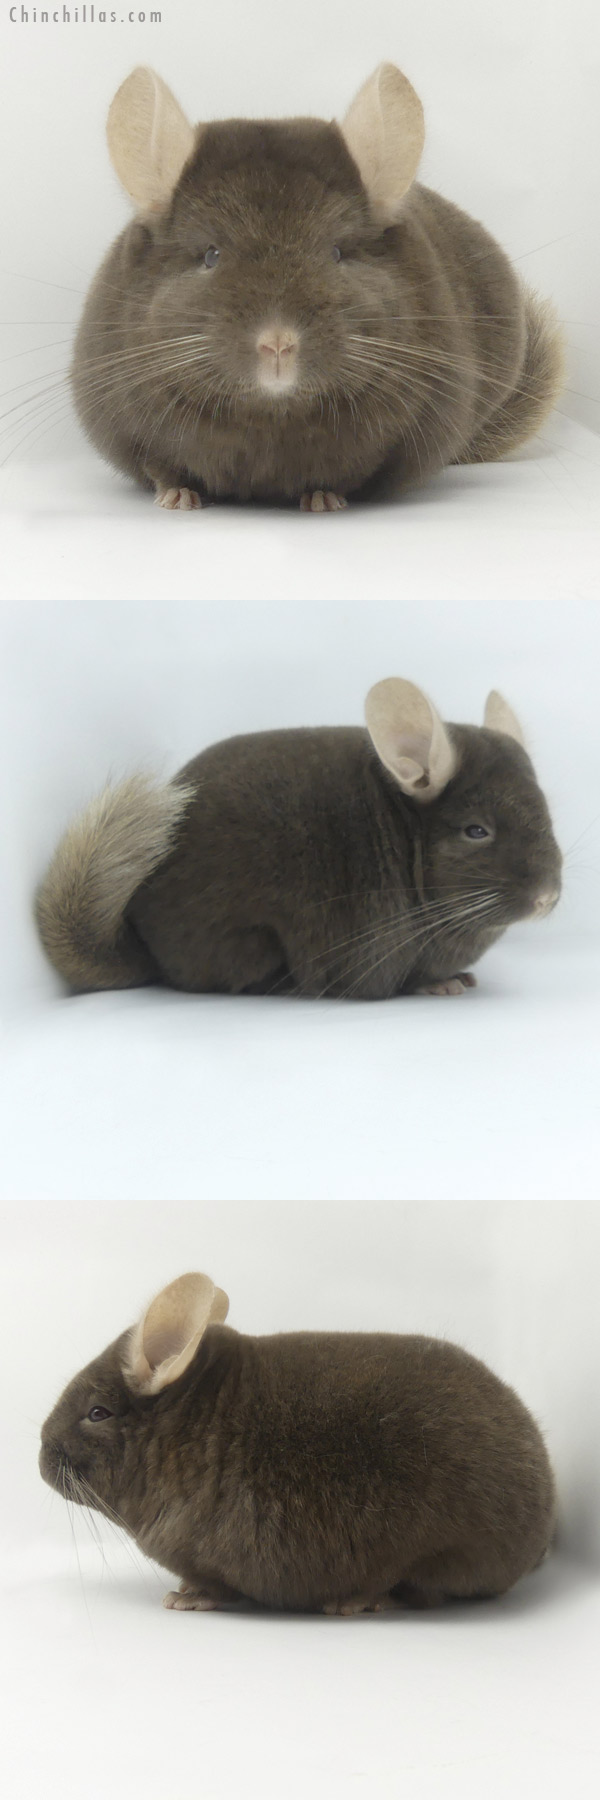 Chinchilla or related item offered for sale or export on Chinchillas.com - 19463 Premium Production Quality Dark Tan Female Chinchilla